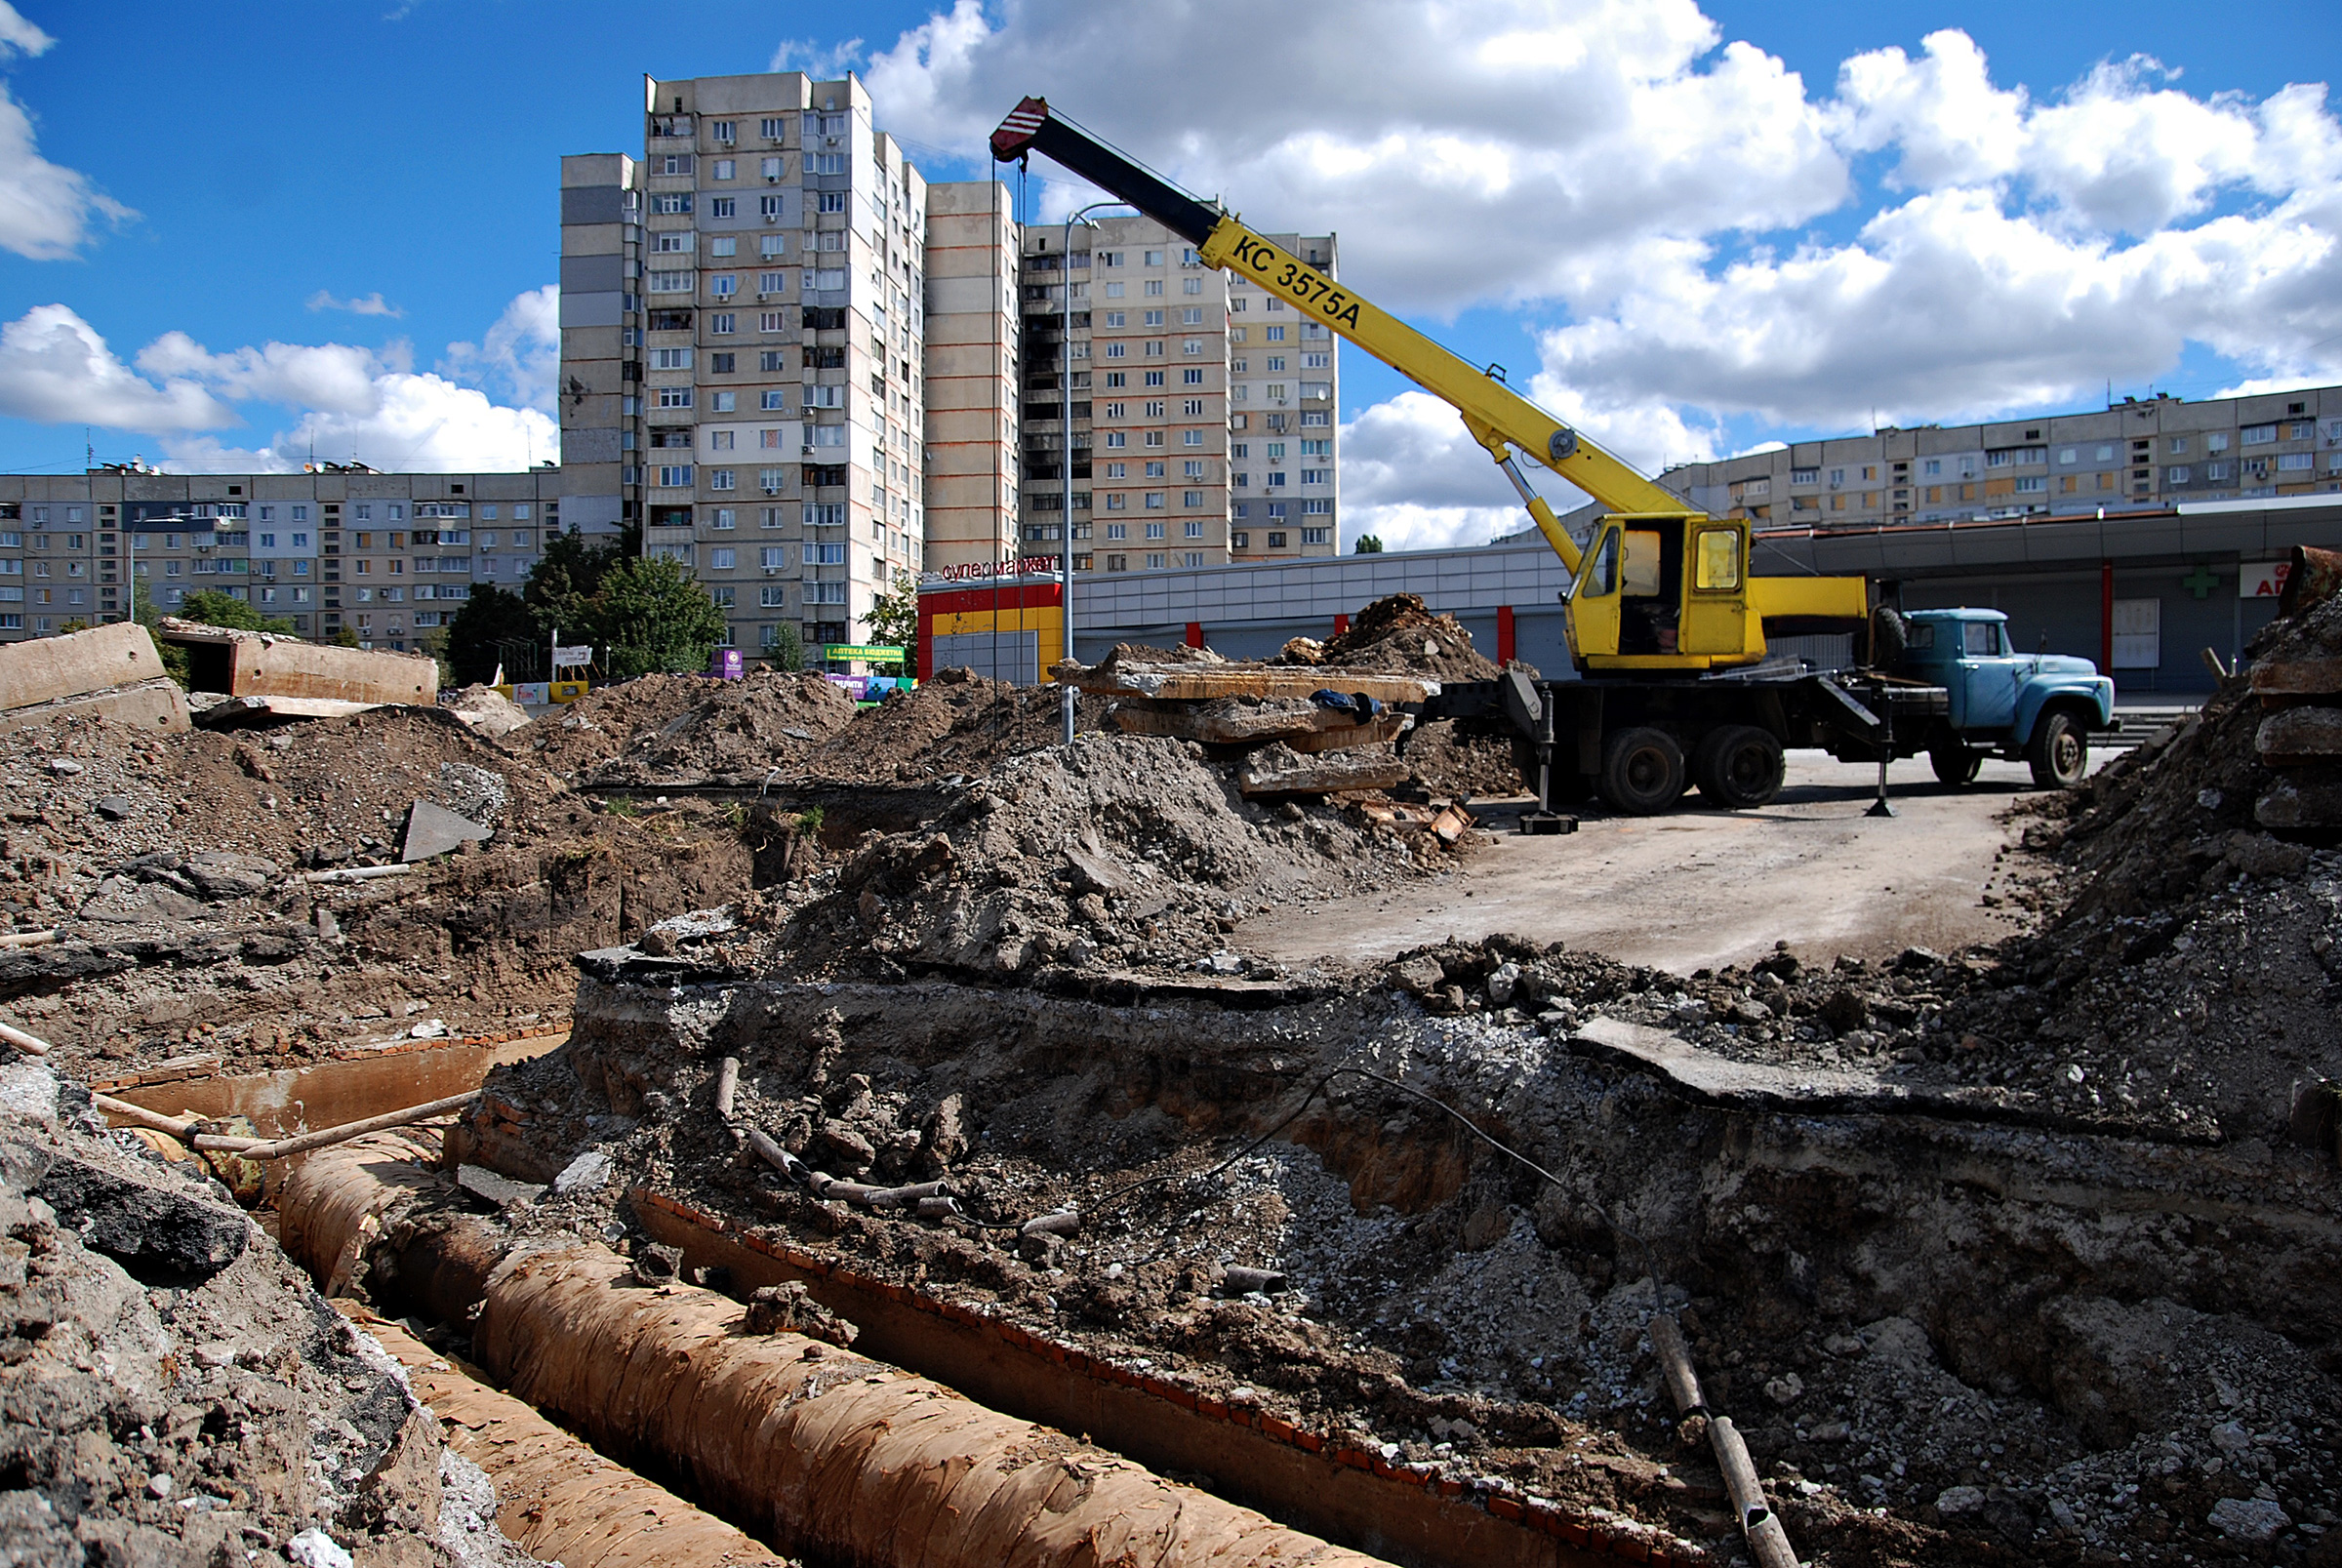 The truck crane stands next to the section of the heating main where utility workers replace old pipes on Sept. 9 in Kharkiv, Ukraine. The city authorities organized the replacement of heating pipes to reduce heat losses in the Saltivka district, despite daily shelling by Russian troops. (Oleksandr Lapshyn—Global Images Ukraine/Getty Images)